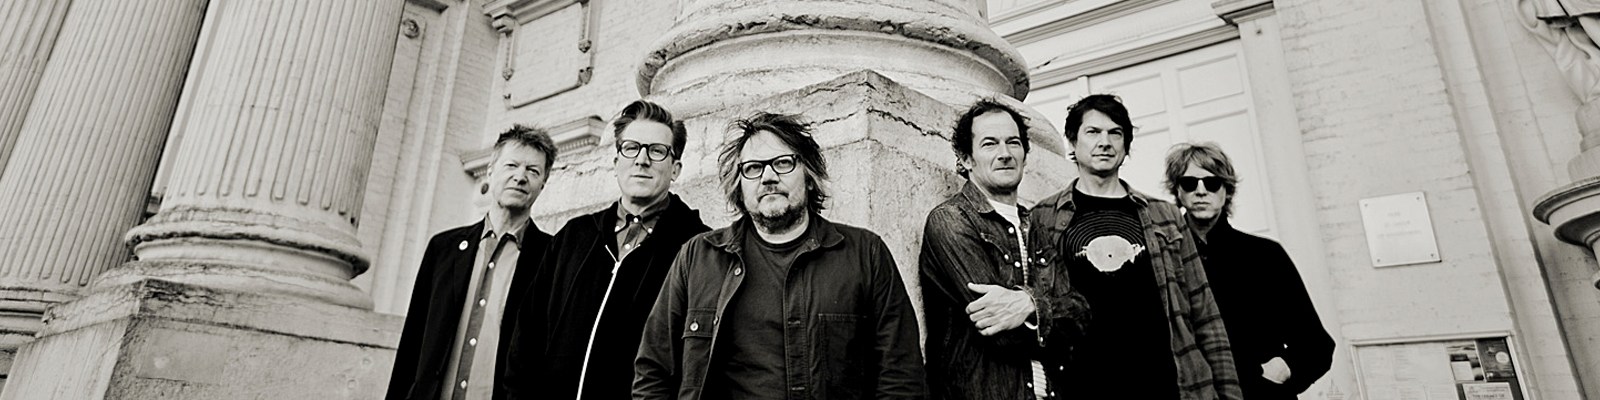 The New Wilco Album Is Their Best In More Than A Decade